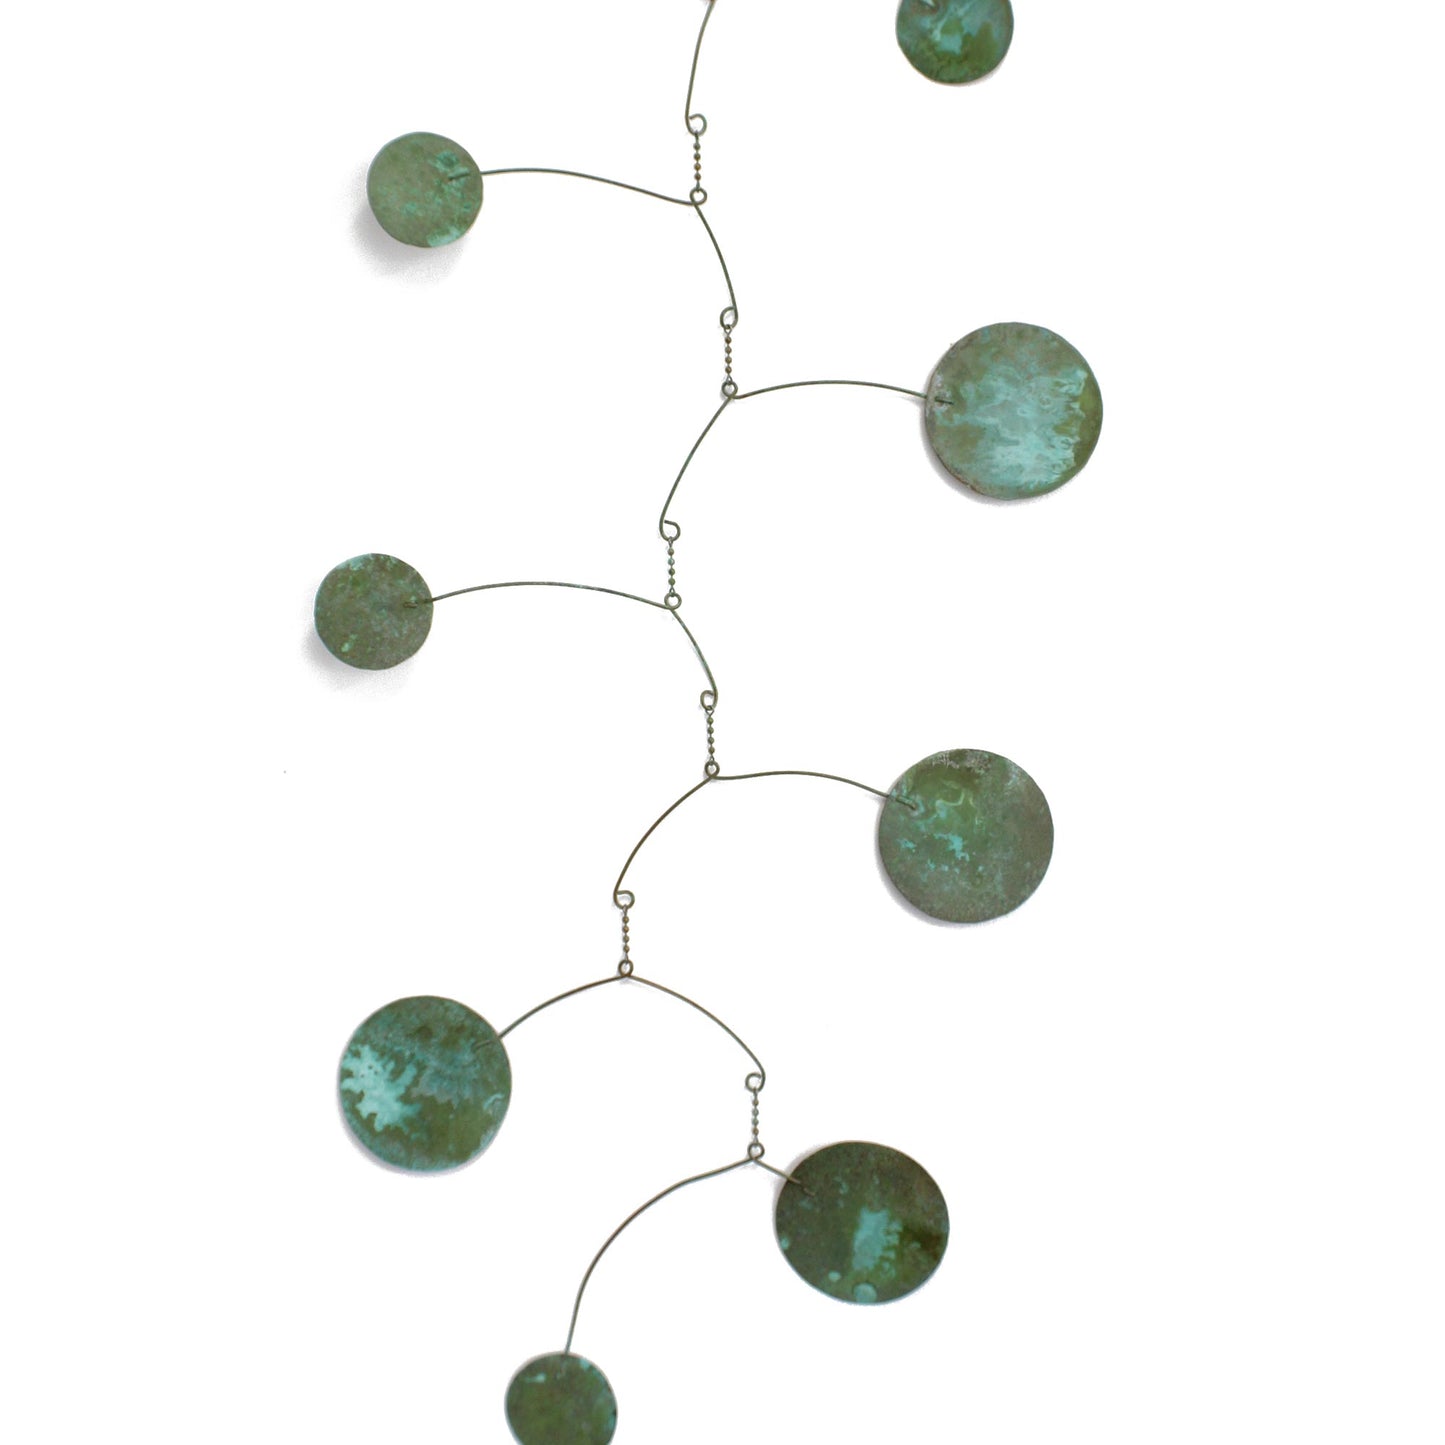 Kinetic Mobile 35" L, Hanging Copper Mobile with Verdigris Green Patina